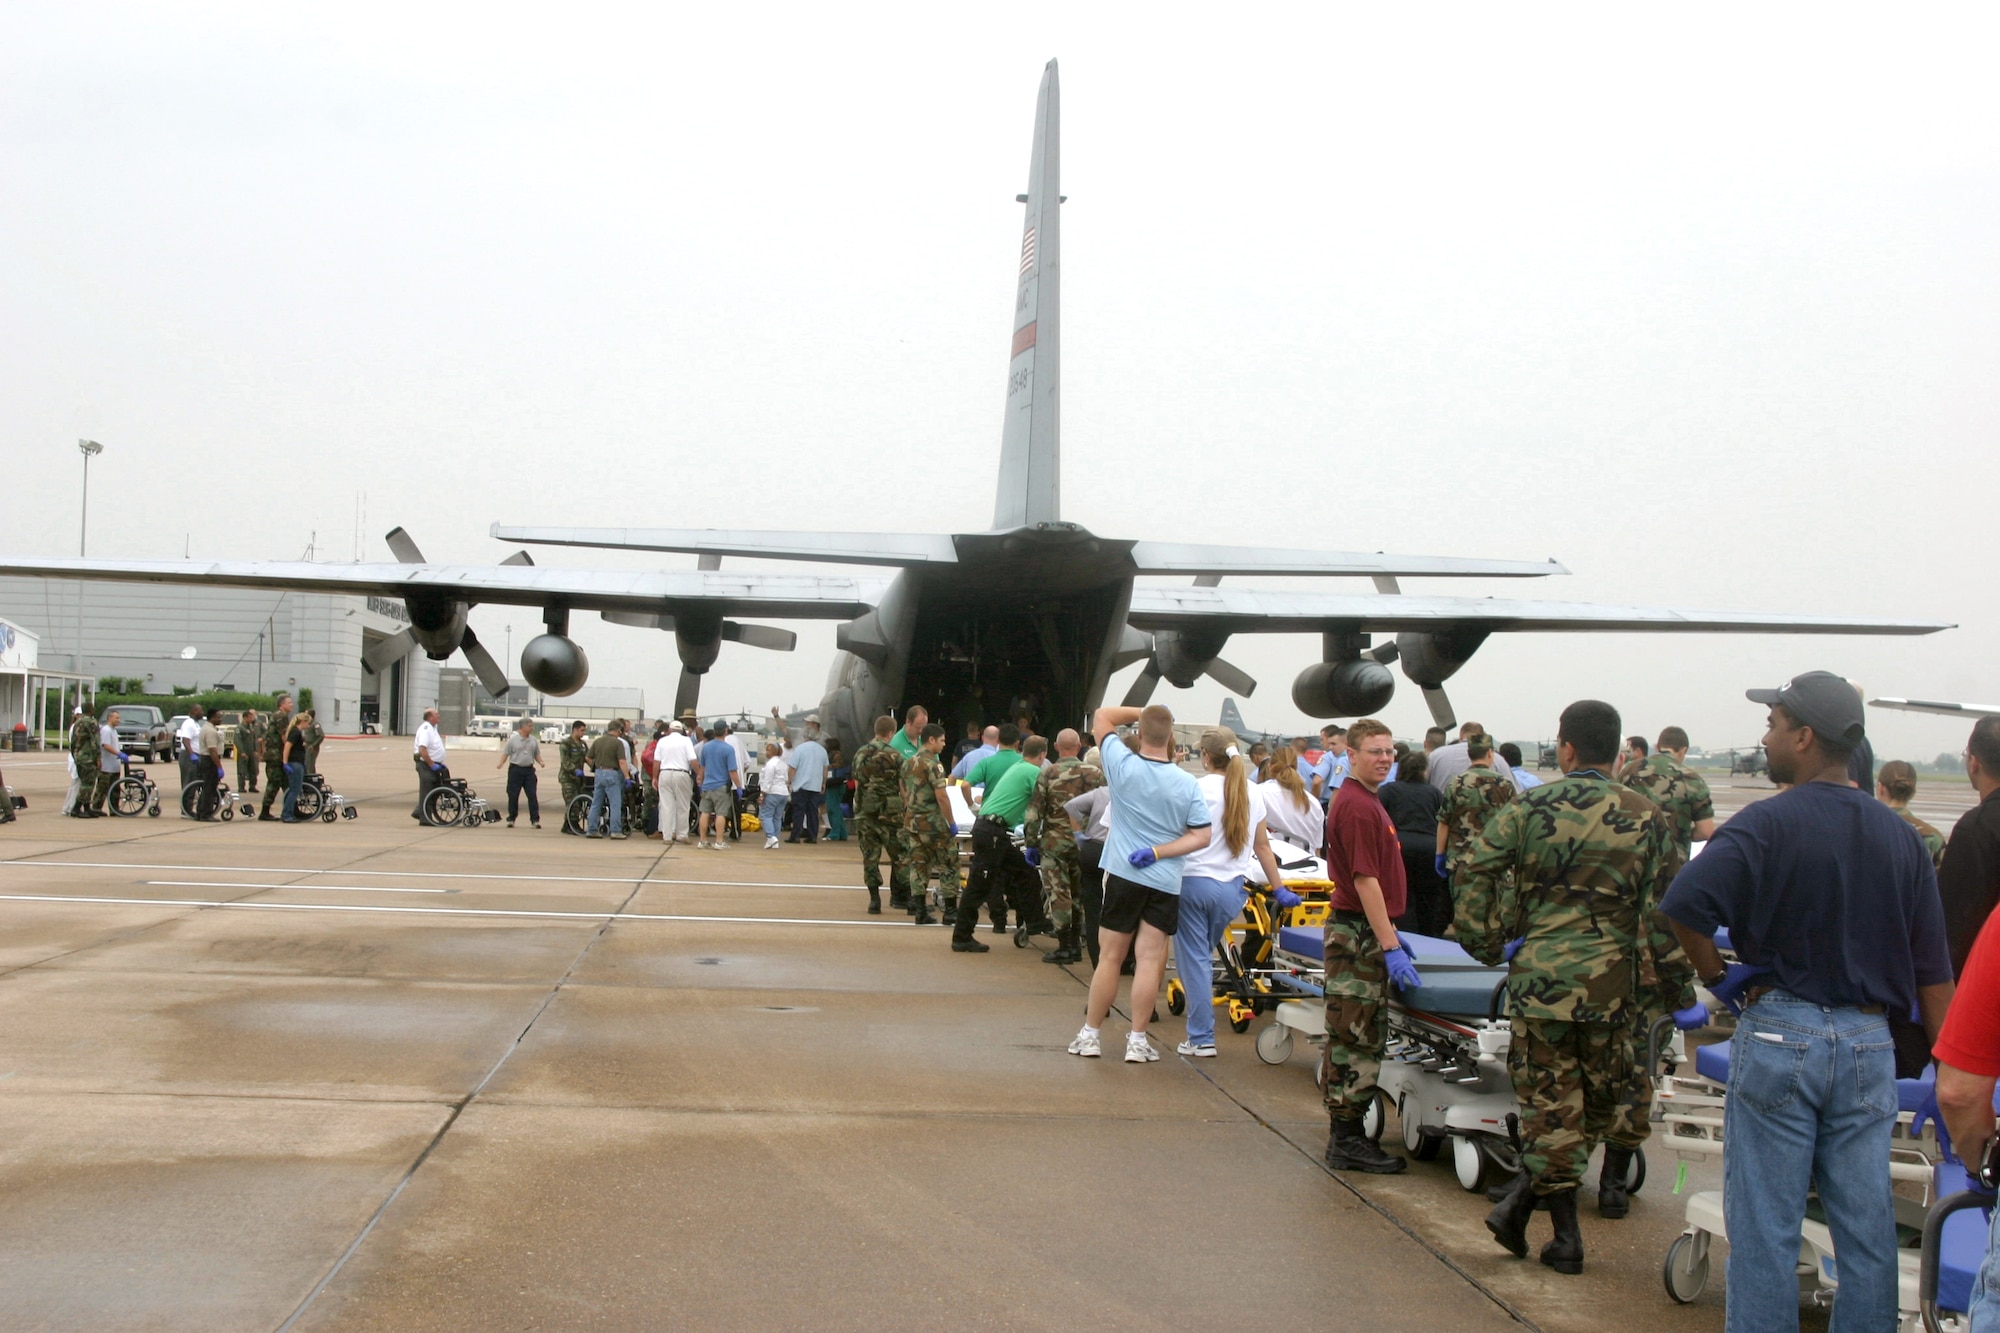 ELLINGTON FIELD, Texas -- Emergency responders here line up to help unload injured evacuees Sept. 3.  C-130 Hercules crews from the 50th Airlift Squadron at Little Rock Air Force Base, Ark., teamed up with Airmen from the 452nd Aeromedical Evacuation Squadron at March Air Reserve Base, Calif., to relocate sick and injured patients devastated after Hurricane Katrina.  (U.S. Air Force photo by 1st Lt. Jon Quinlan)